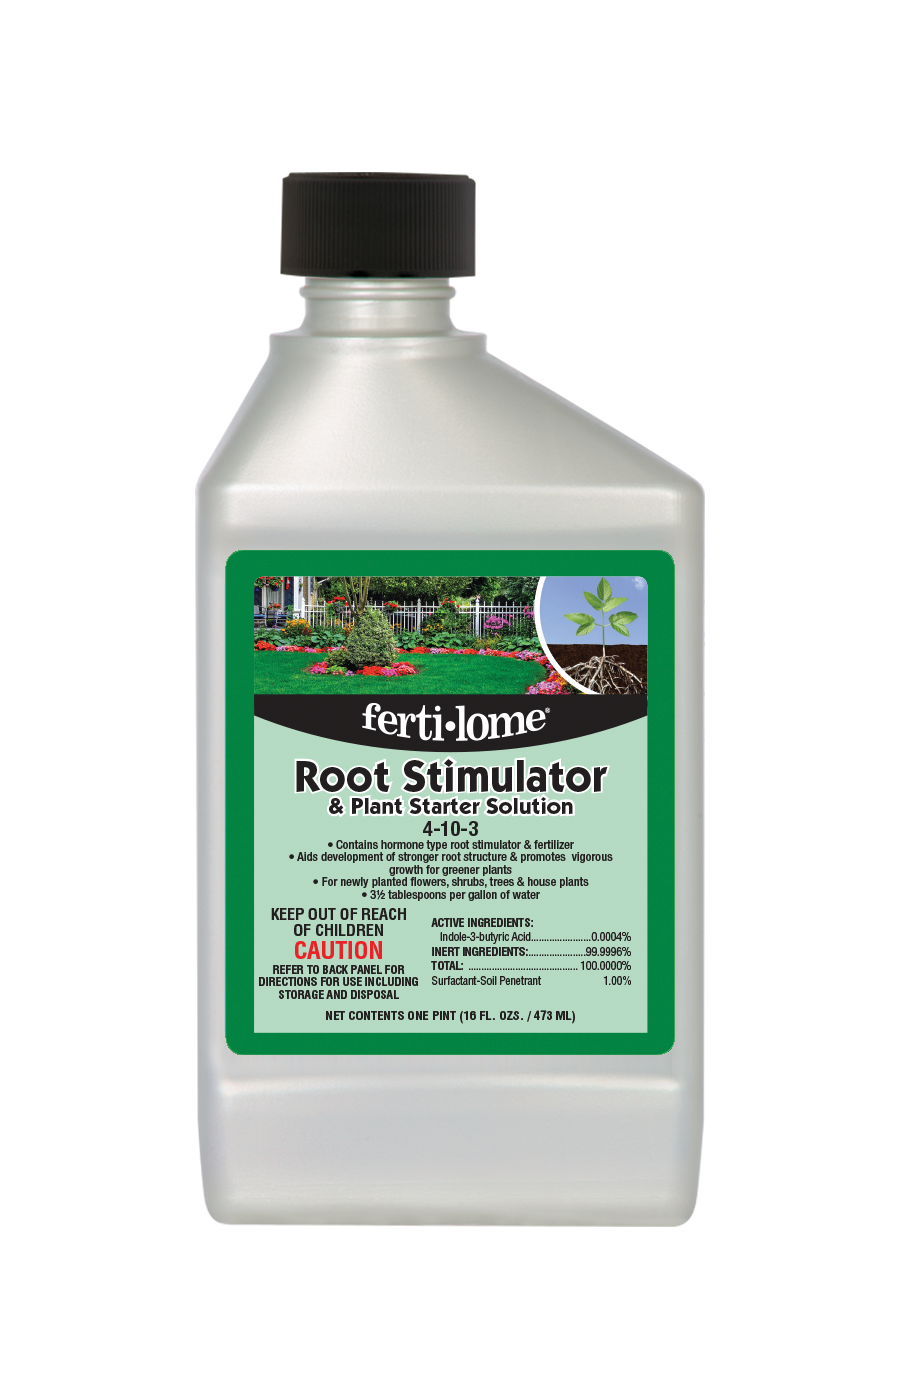 Ferti-lome Root Stimulator helps early root formation and development for when you plant new shrubs, flowers, and trees.